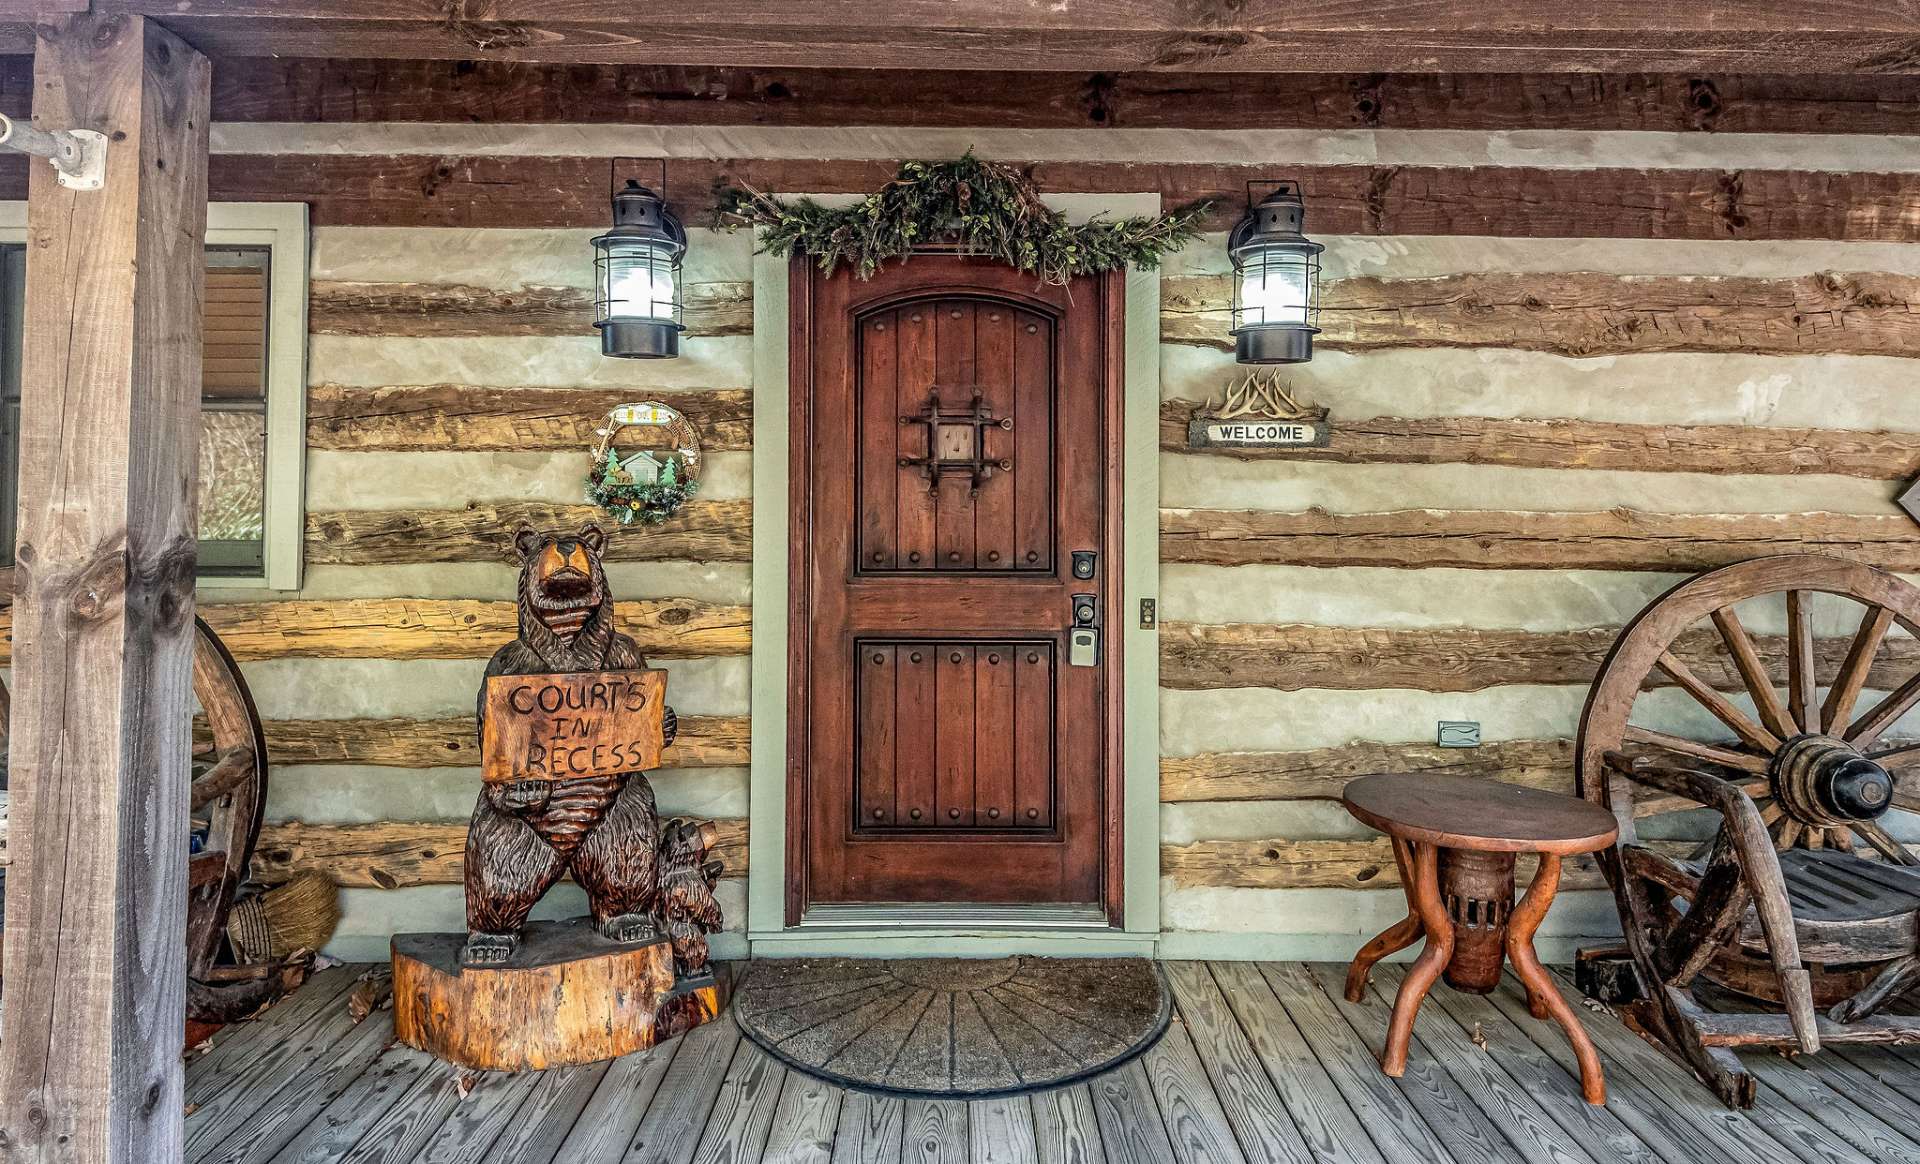 Your mountain oasis awaits you. Notice the custom wood door with speakeasy window and lantern lights used to greet your friends.